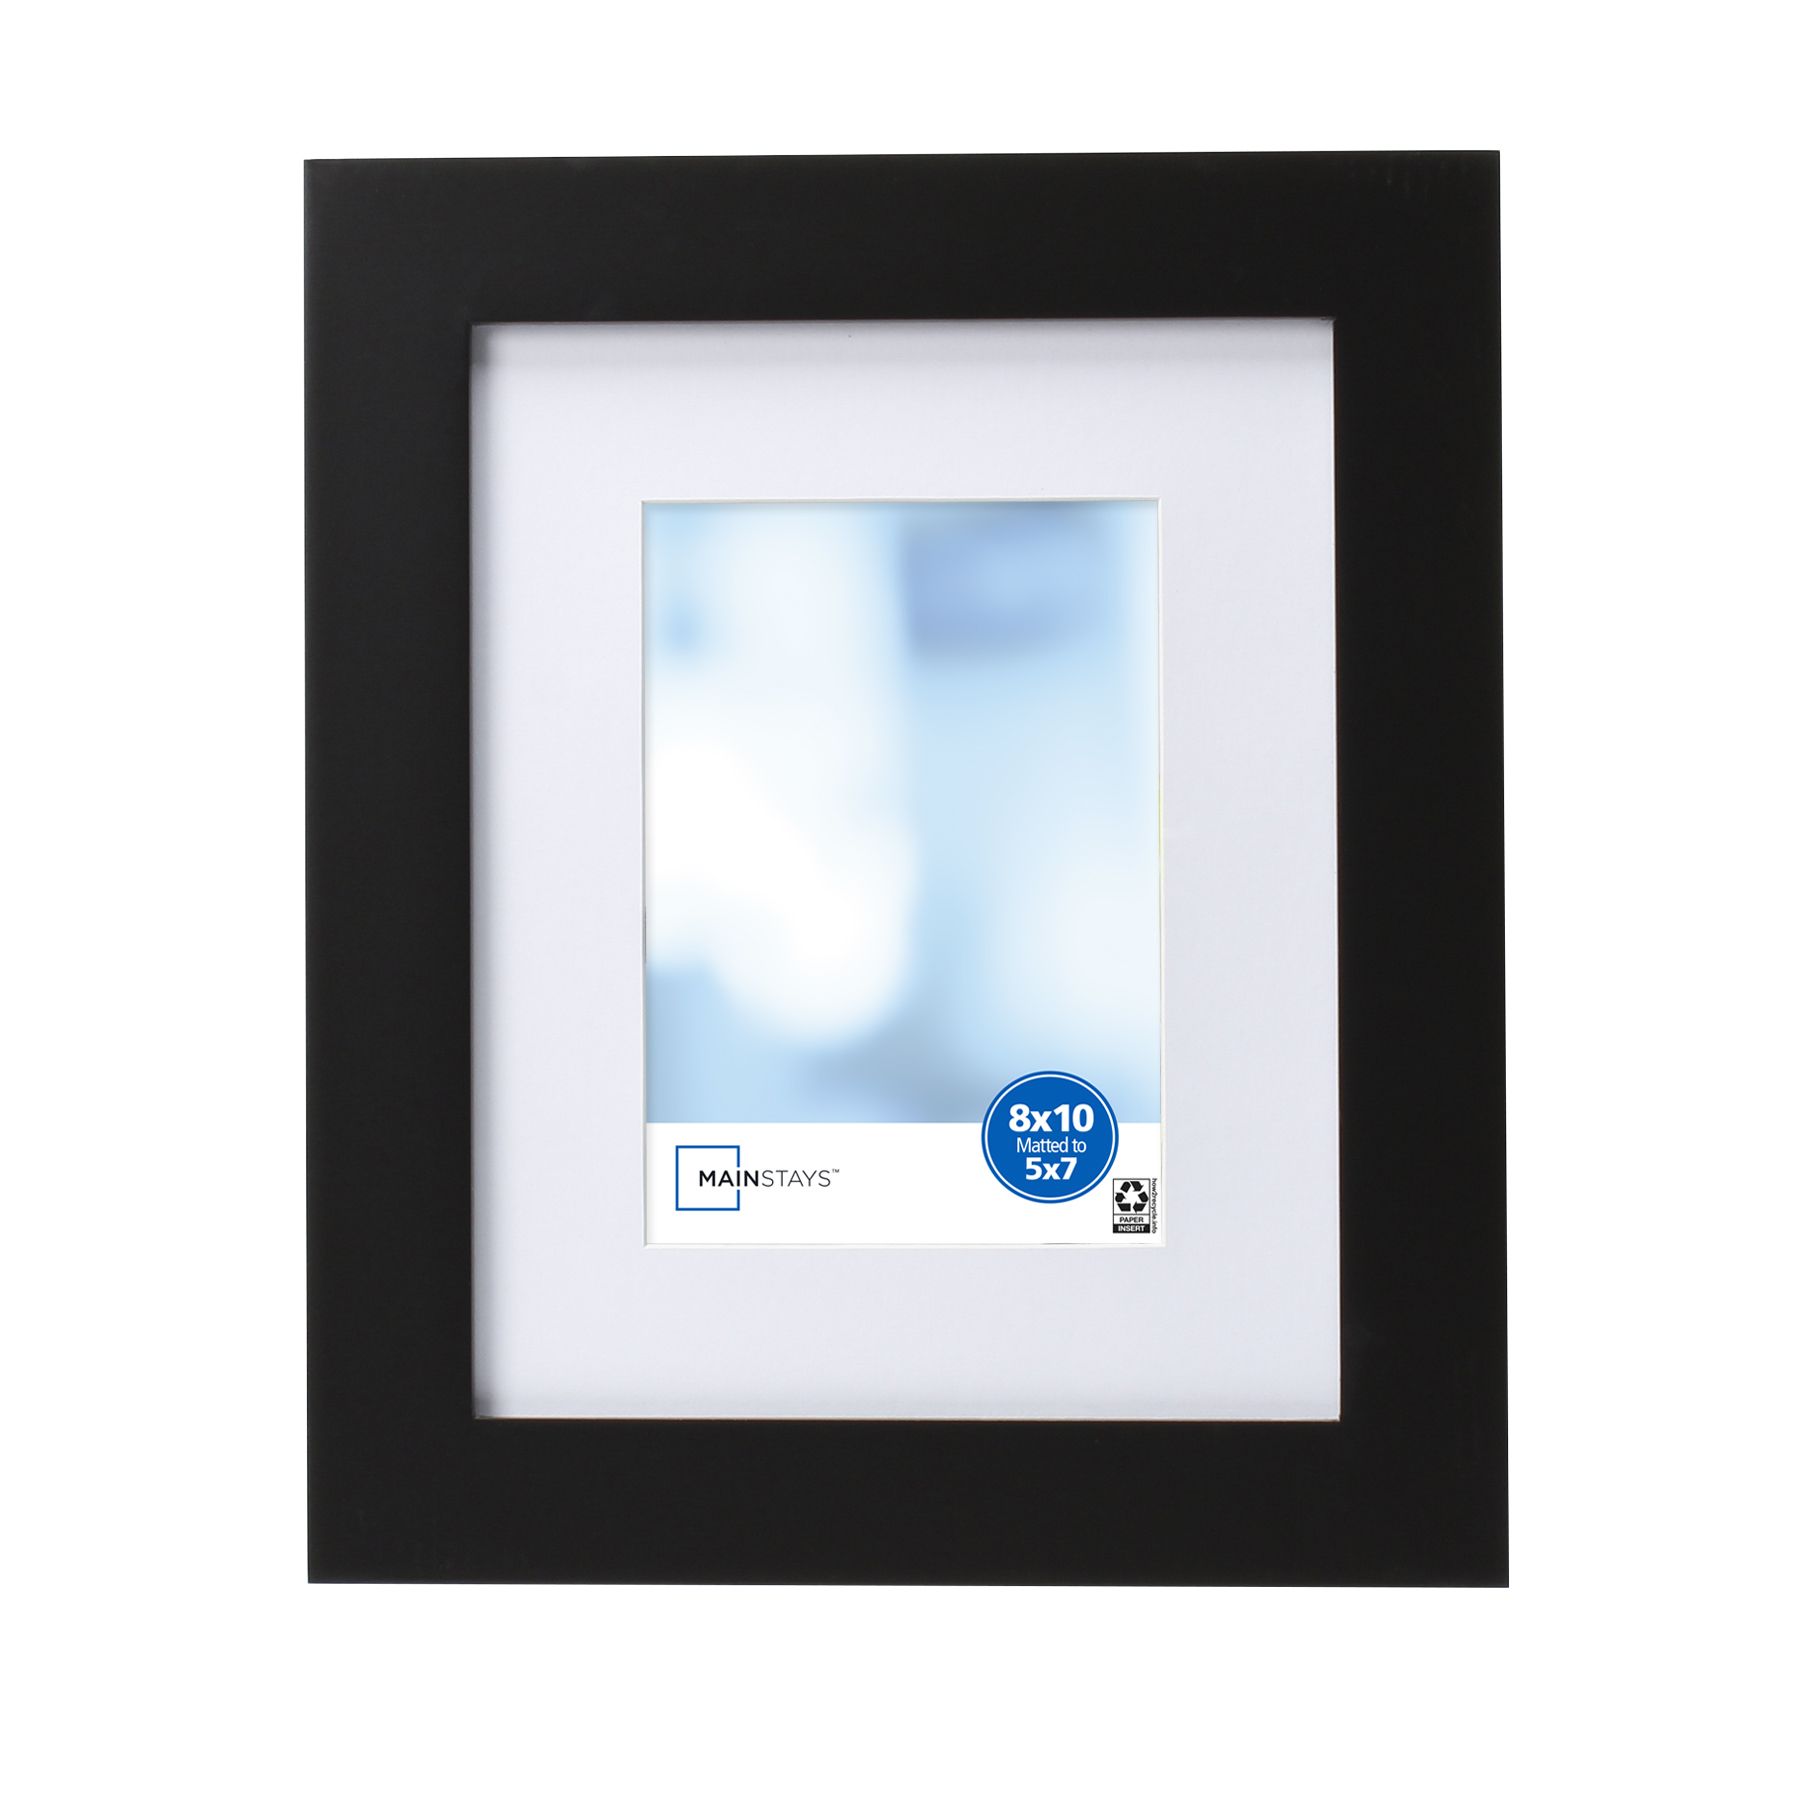 Mainstays Flatwide 8" x 10" to 5" x 7" Picture Frame, Black | Walmart (US)